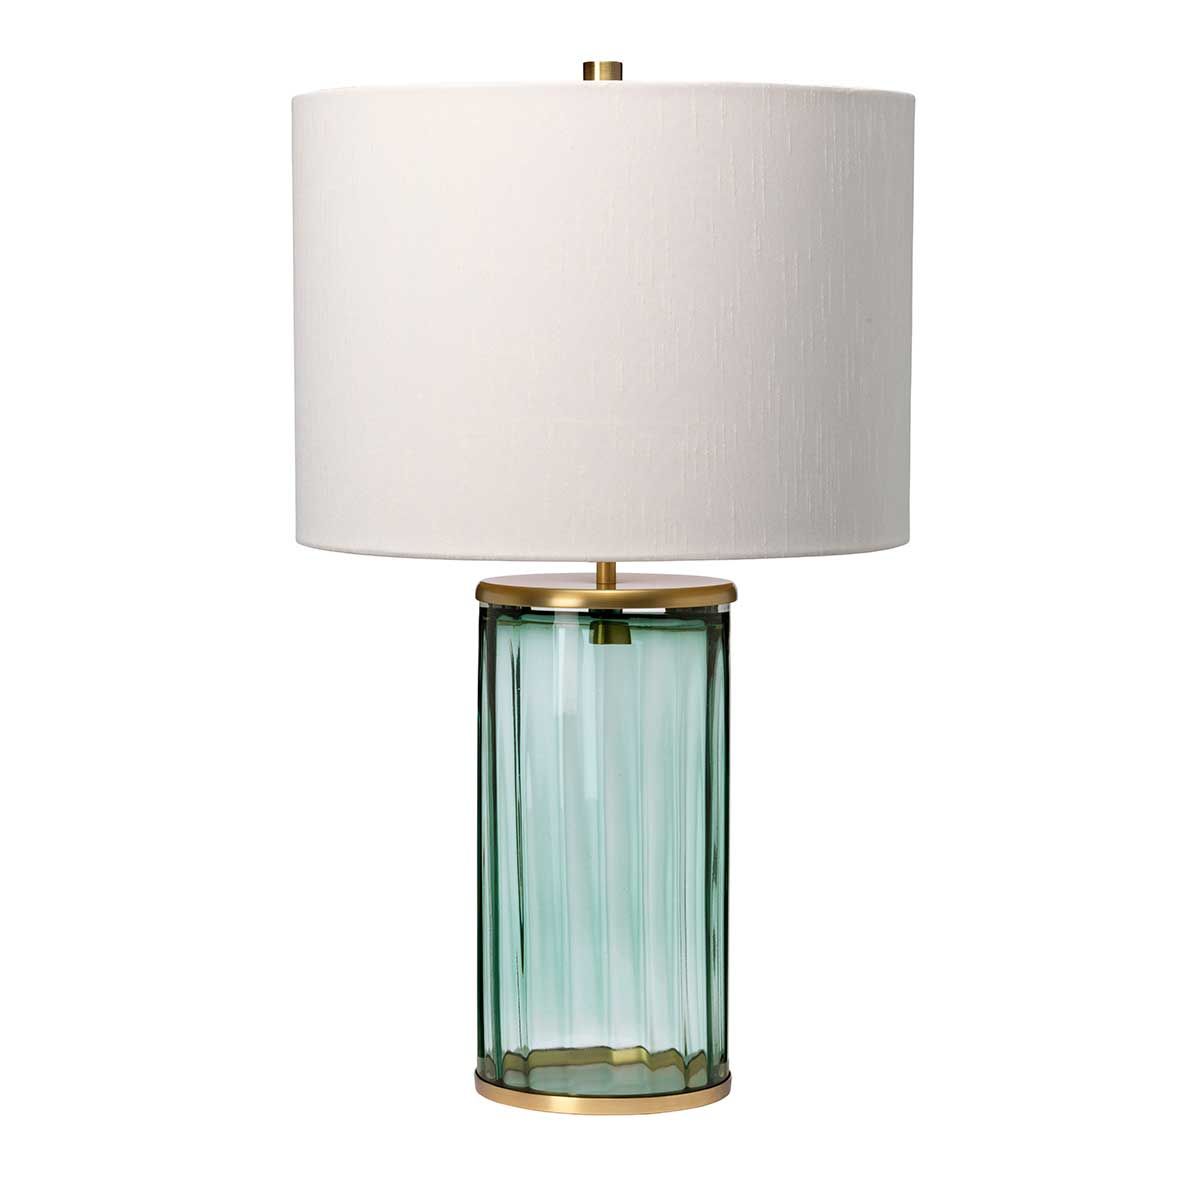 Quintiesse Reno Table Lamp Green Aged Brass